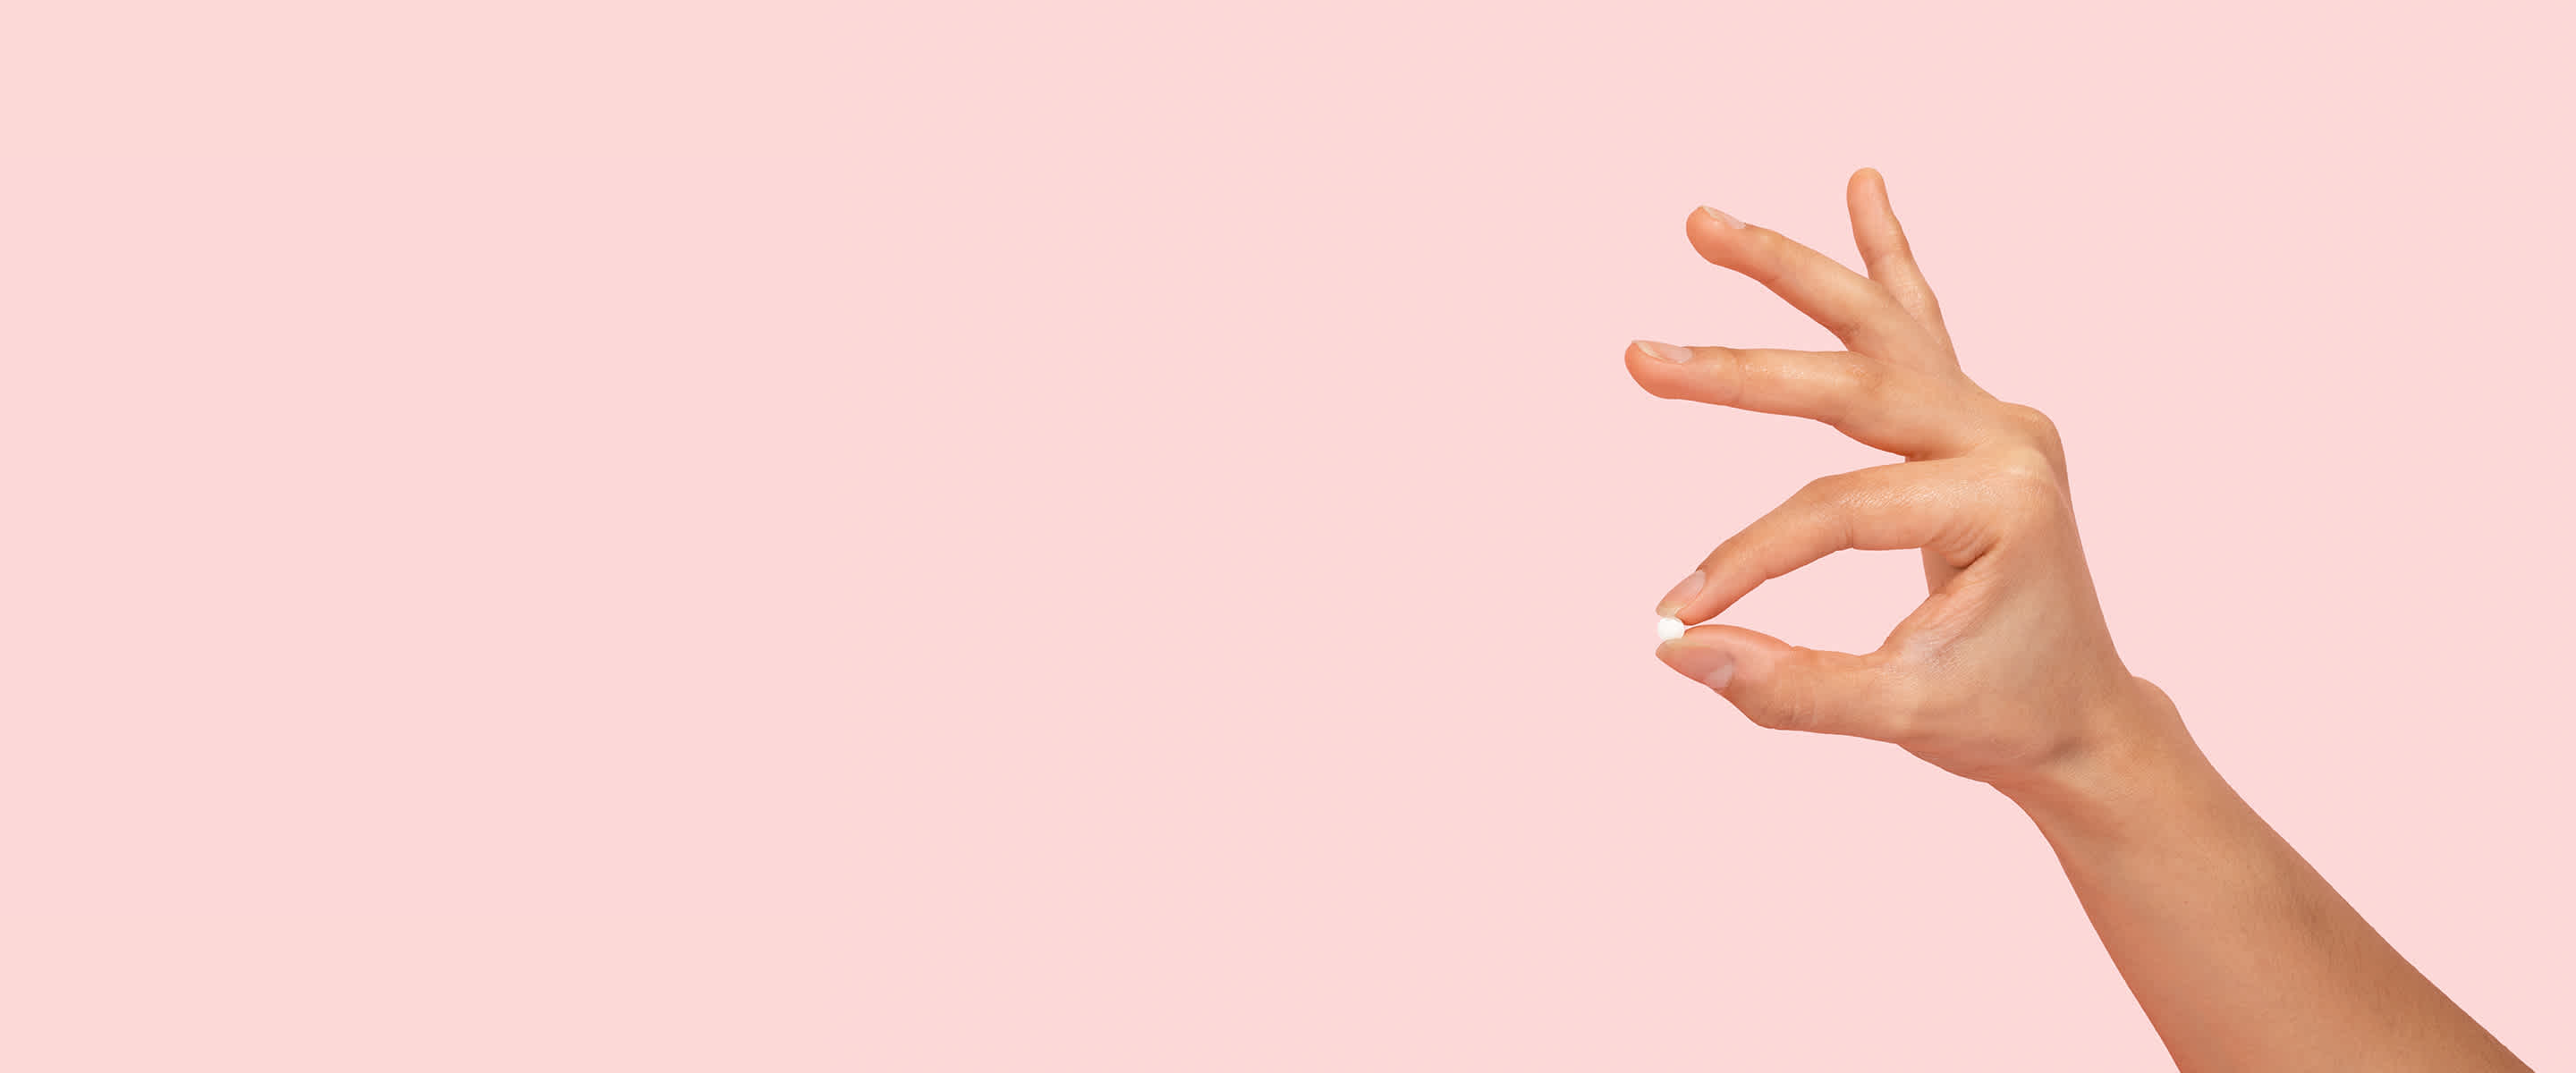 A hand holding a single emergency contraception pill between the thumb and index fingers.